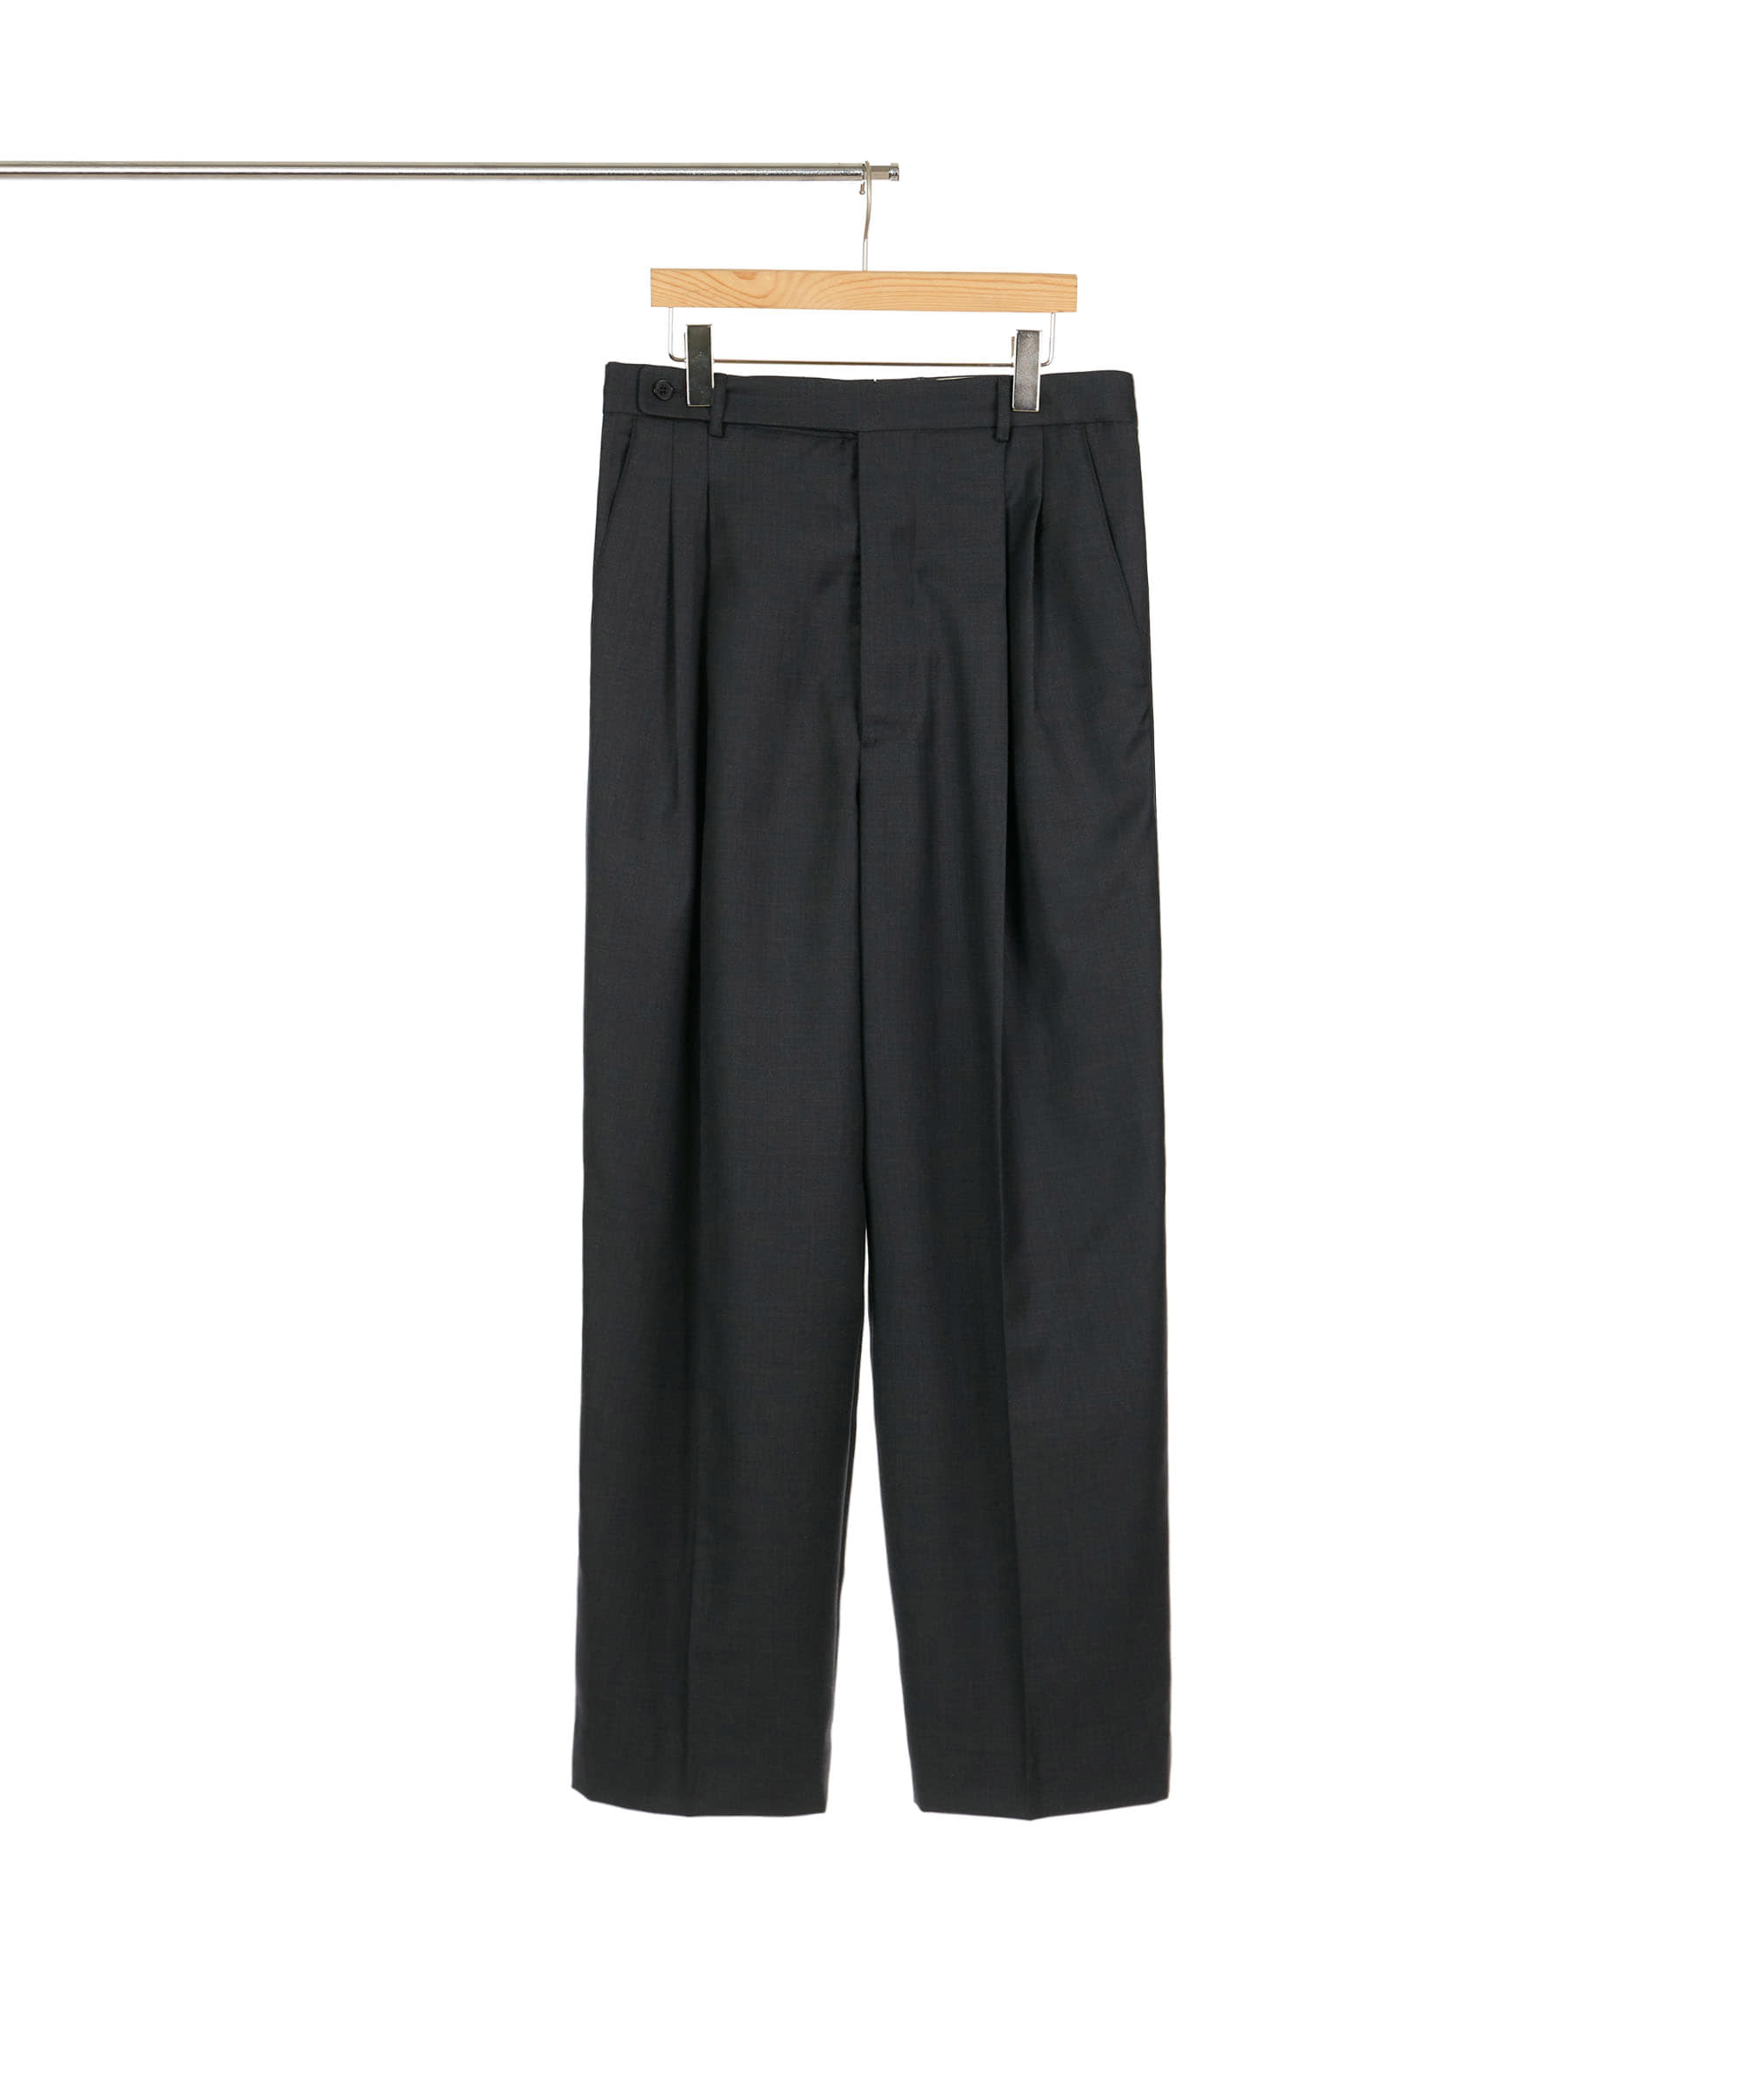 CHARCOAL TWO-TUCK WIDE PANTS 01